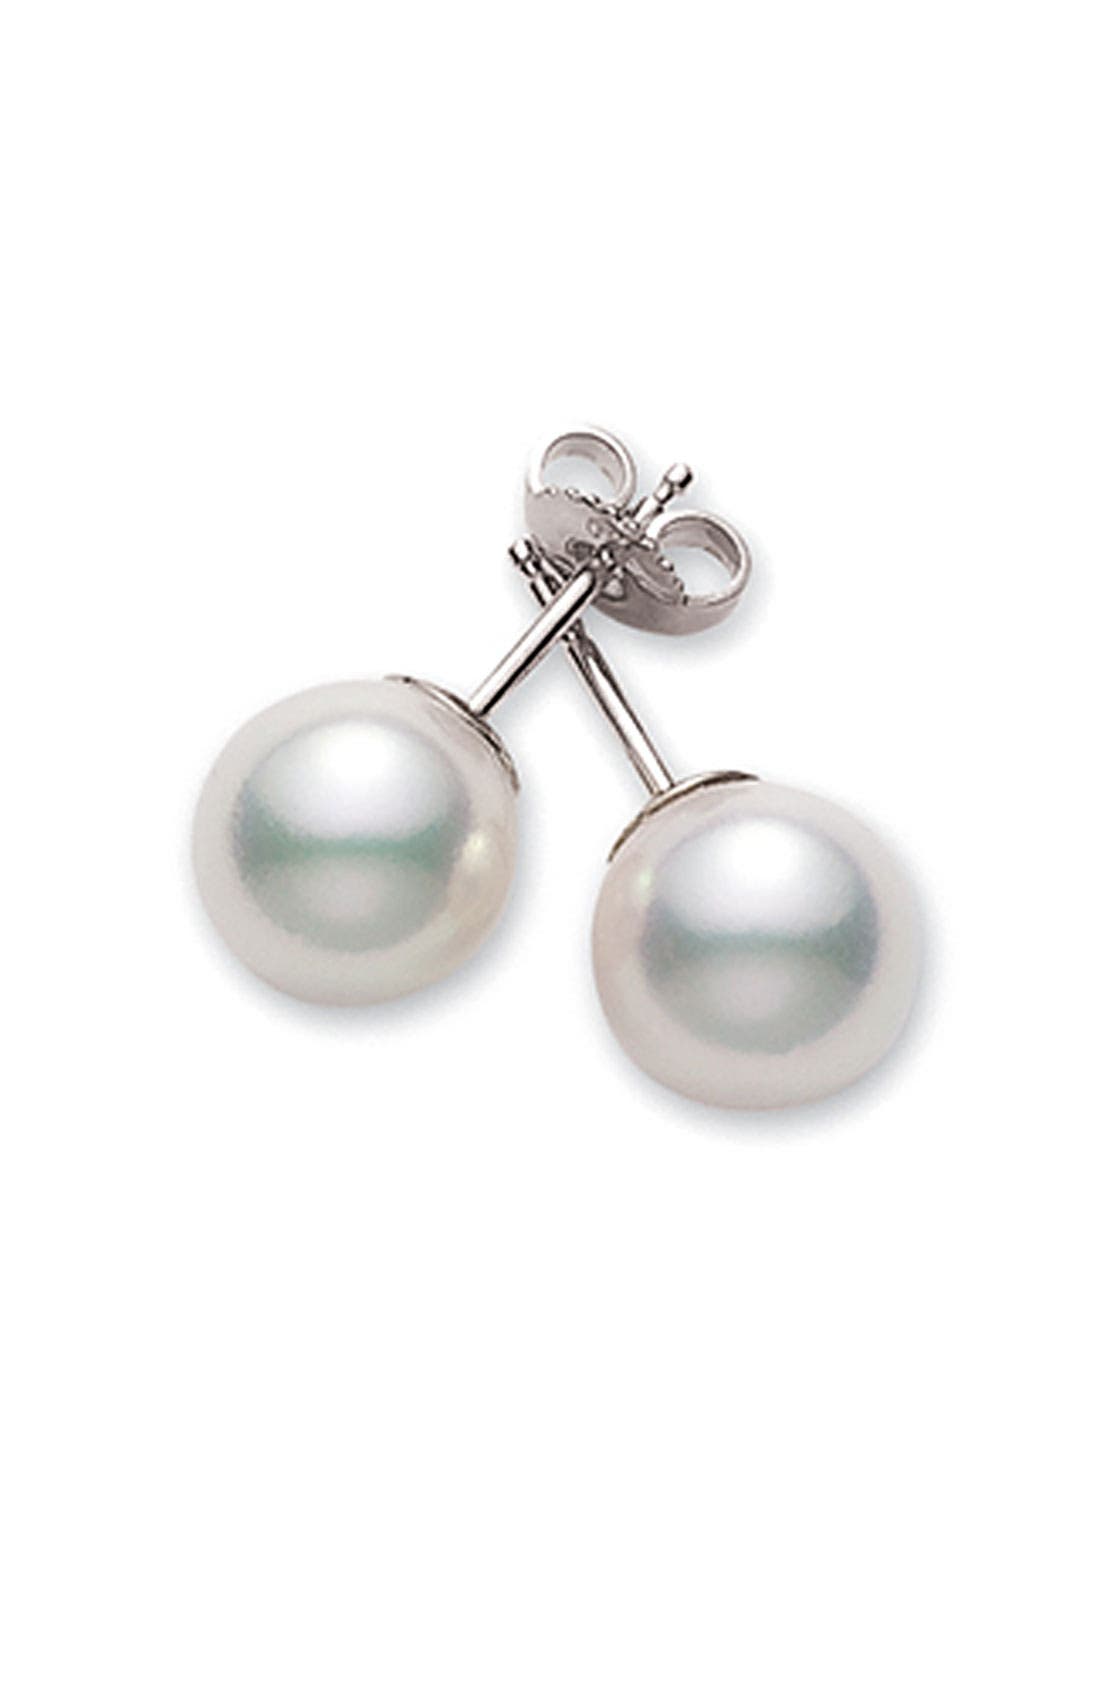 Shades of Black and Gray Pearl Dangle Earrings